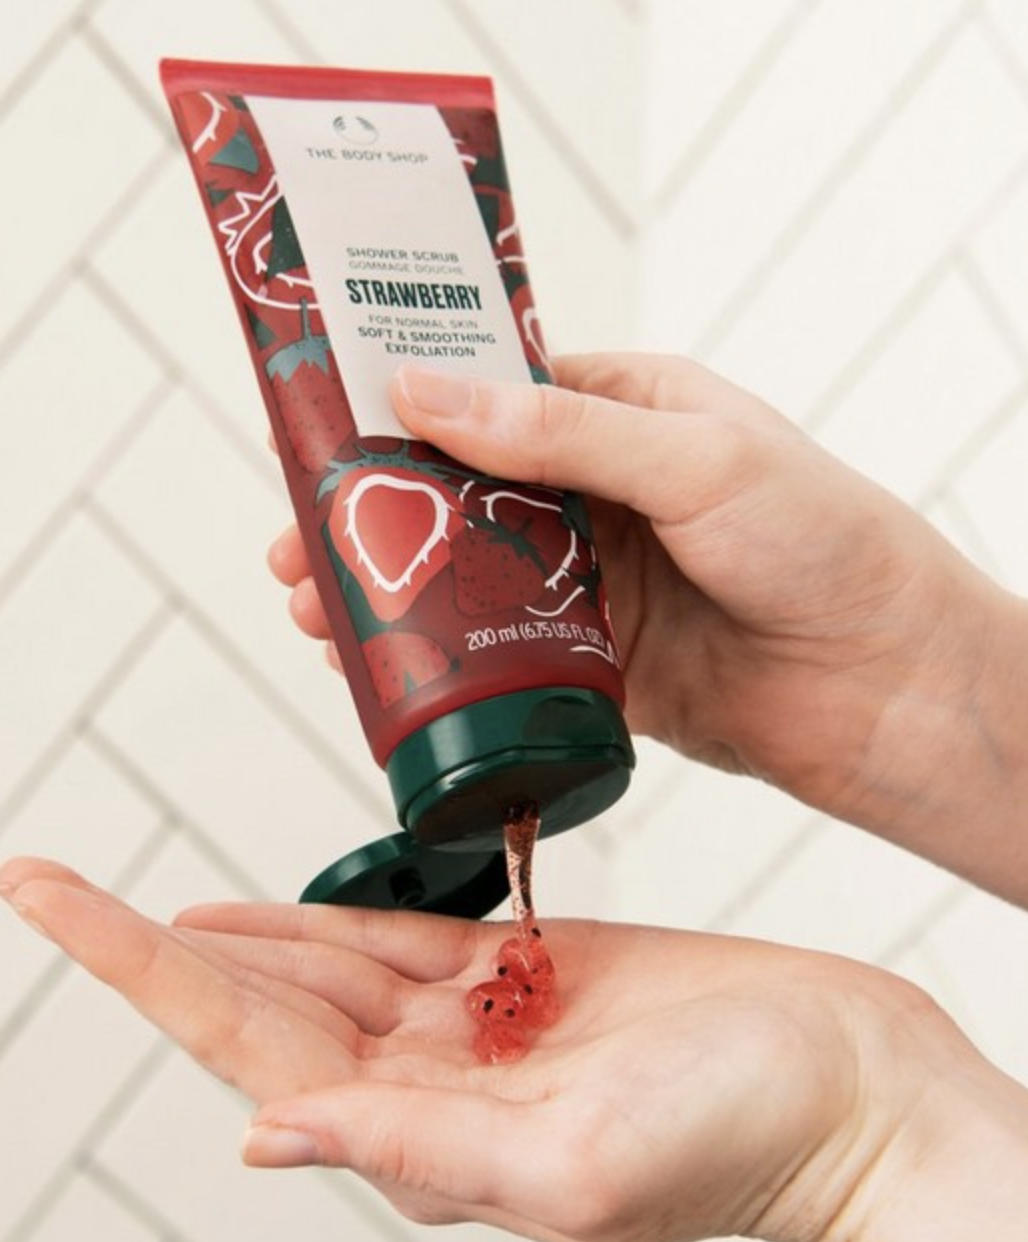 a person squeezing the tube of body scrub into their hand in the shower